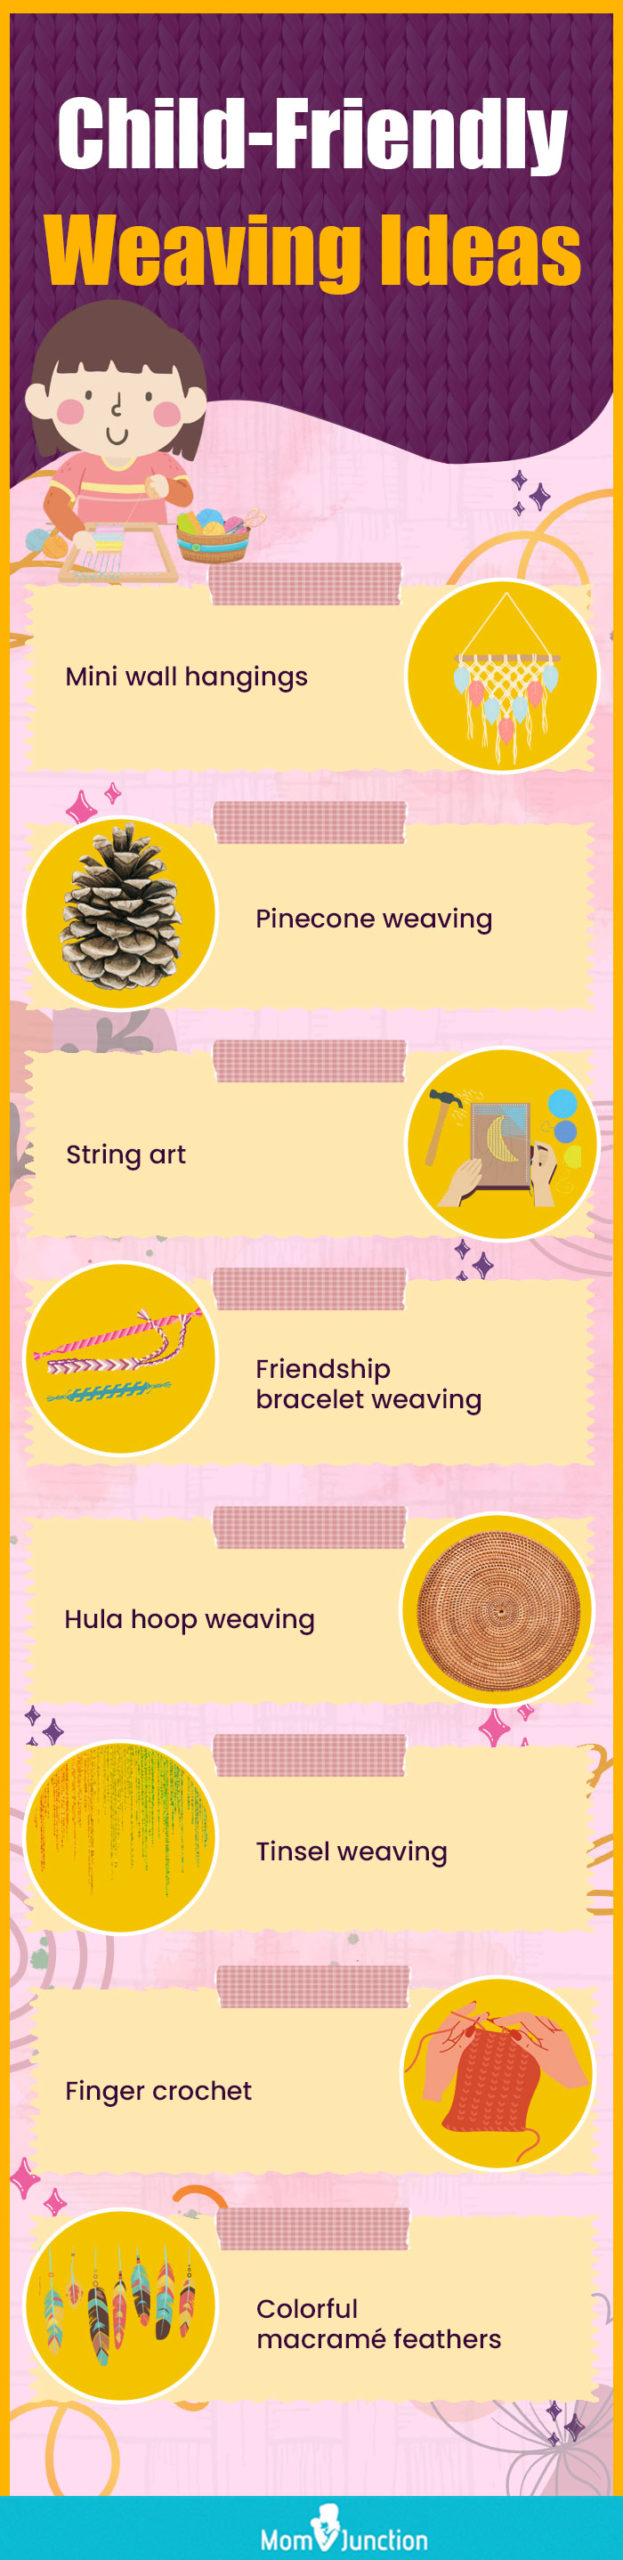 child friendly weaving ideas (infographic)